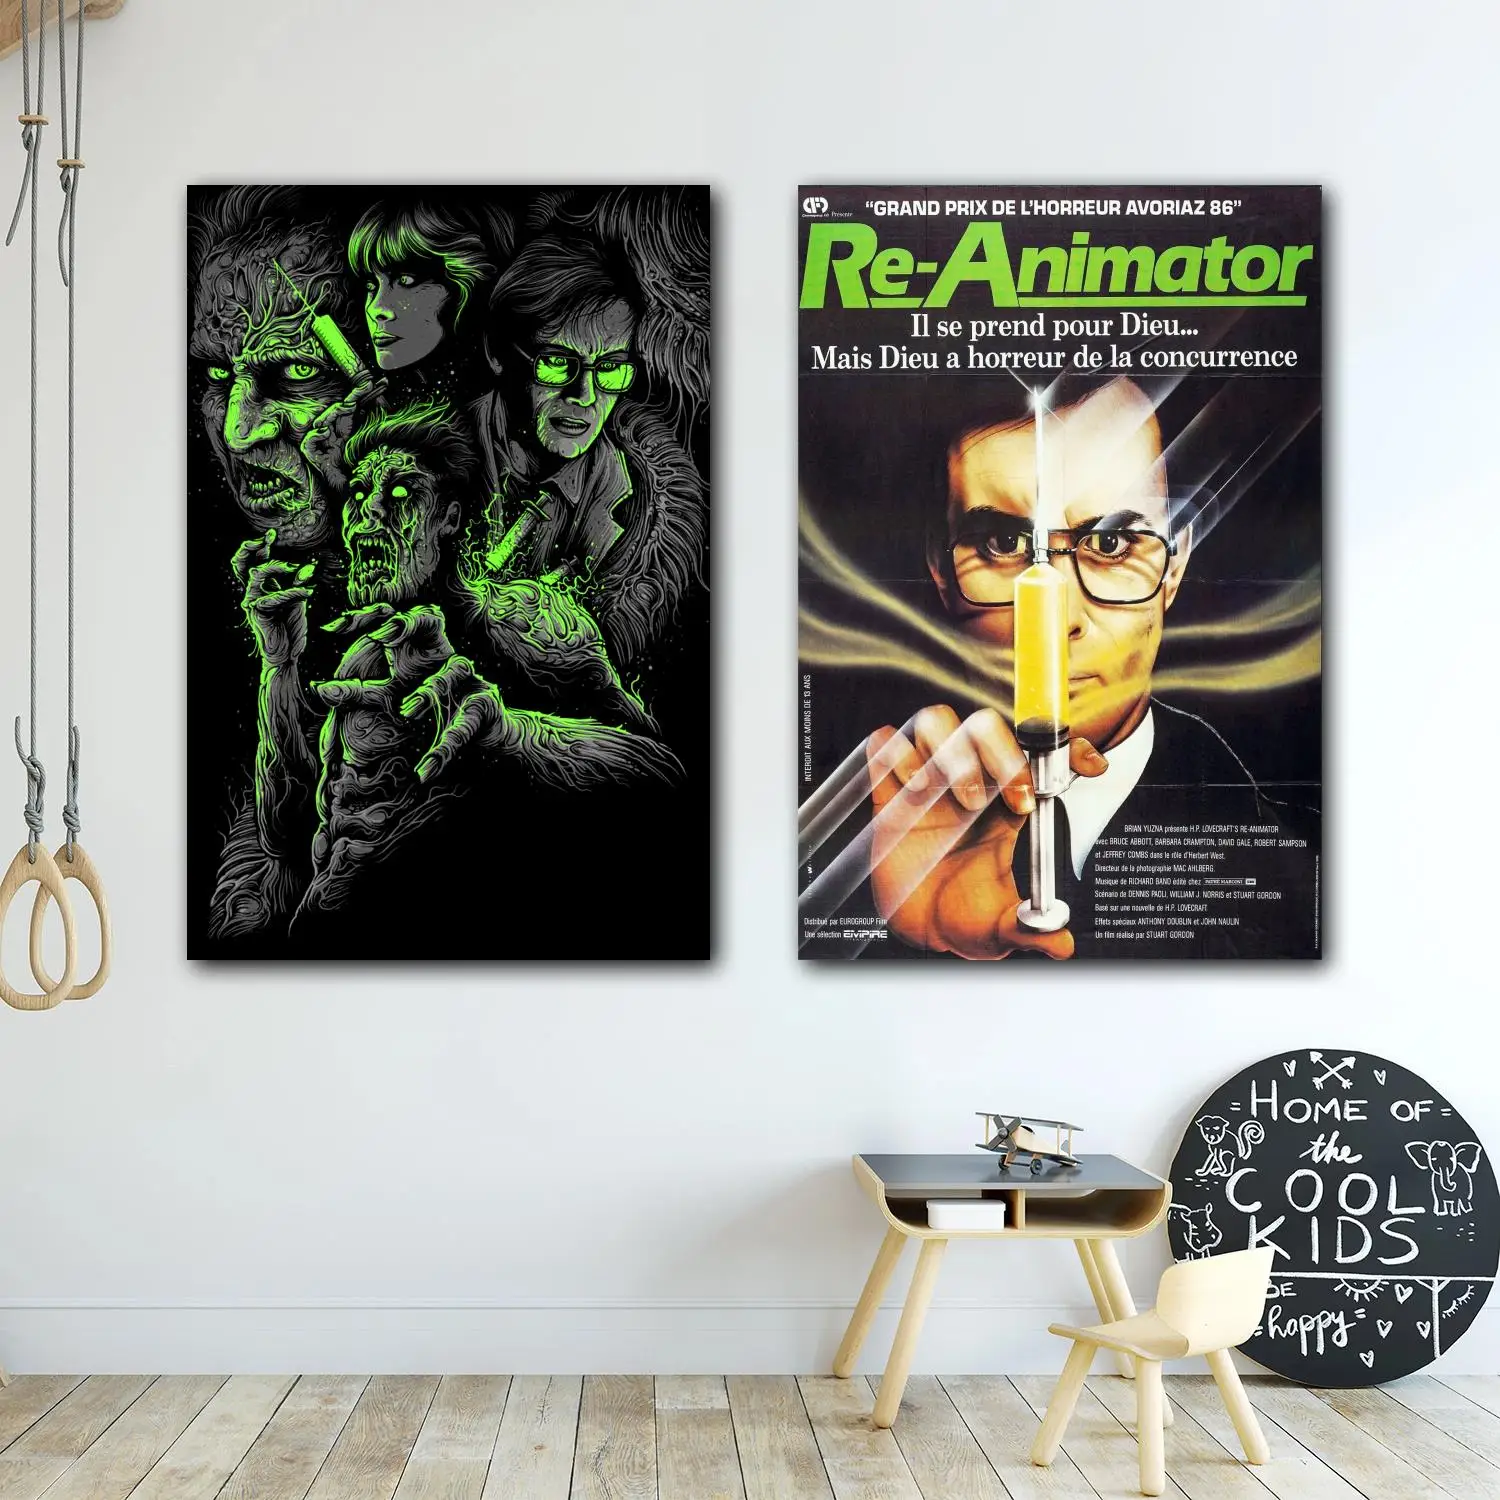 

re-animator Movie Decorative Canvas 24x36 Posters Room Bar Cafe Decor Gift Print Art Wall Paintings